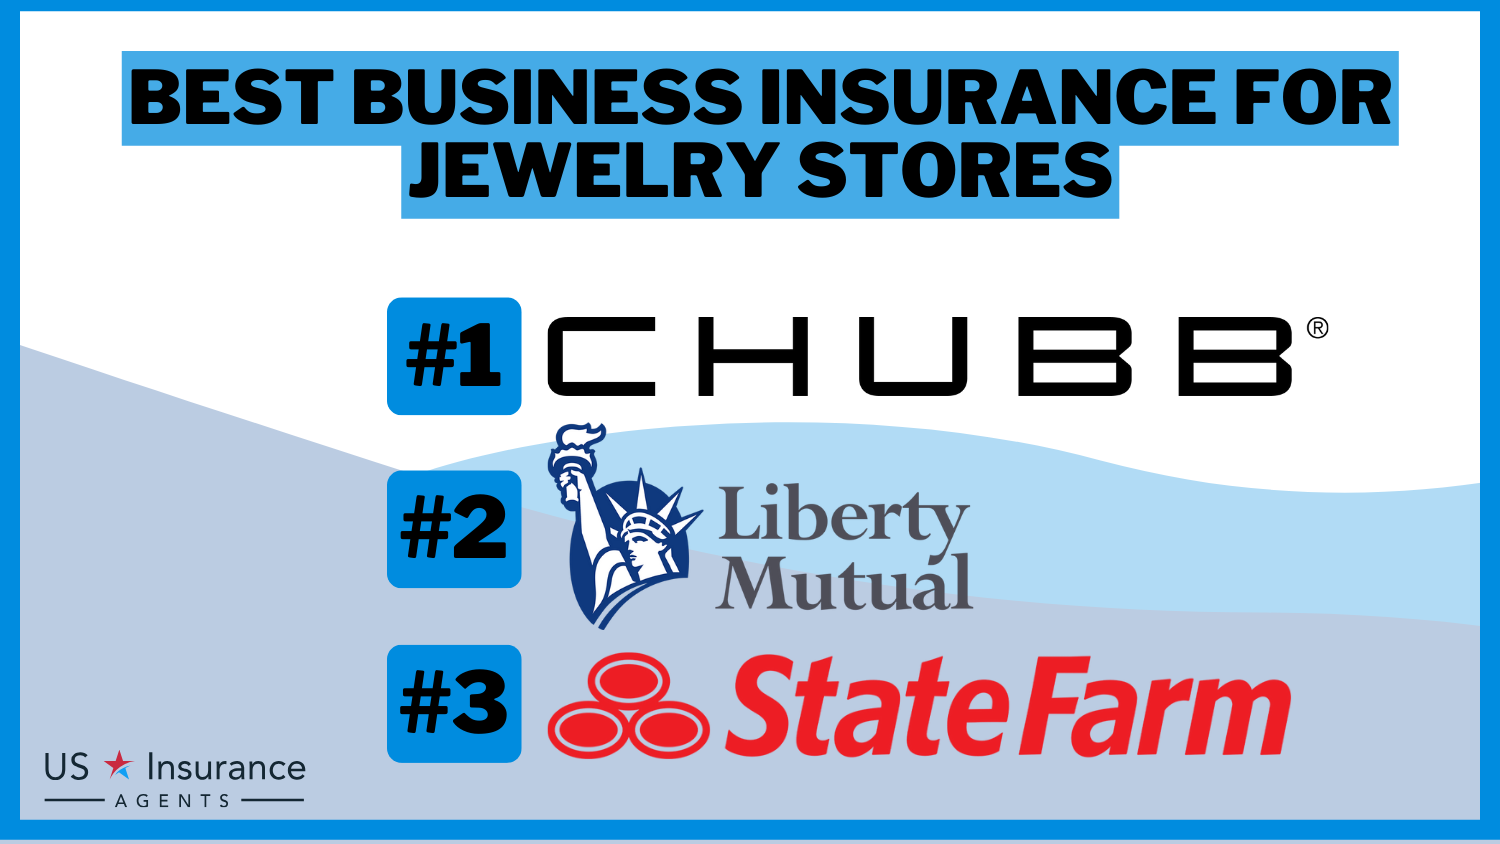 3 Best Business Insurance for Jewelry Stores: Chubb, Liberty Mutual and State Farm.